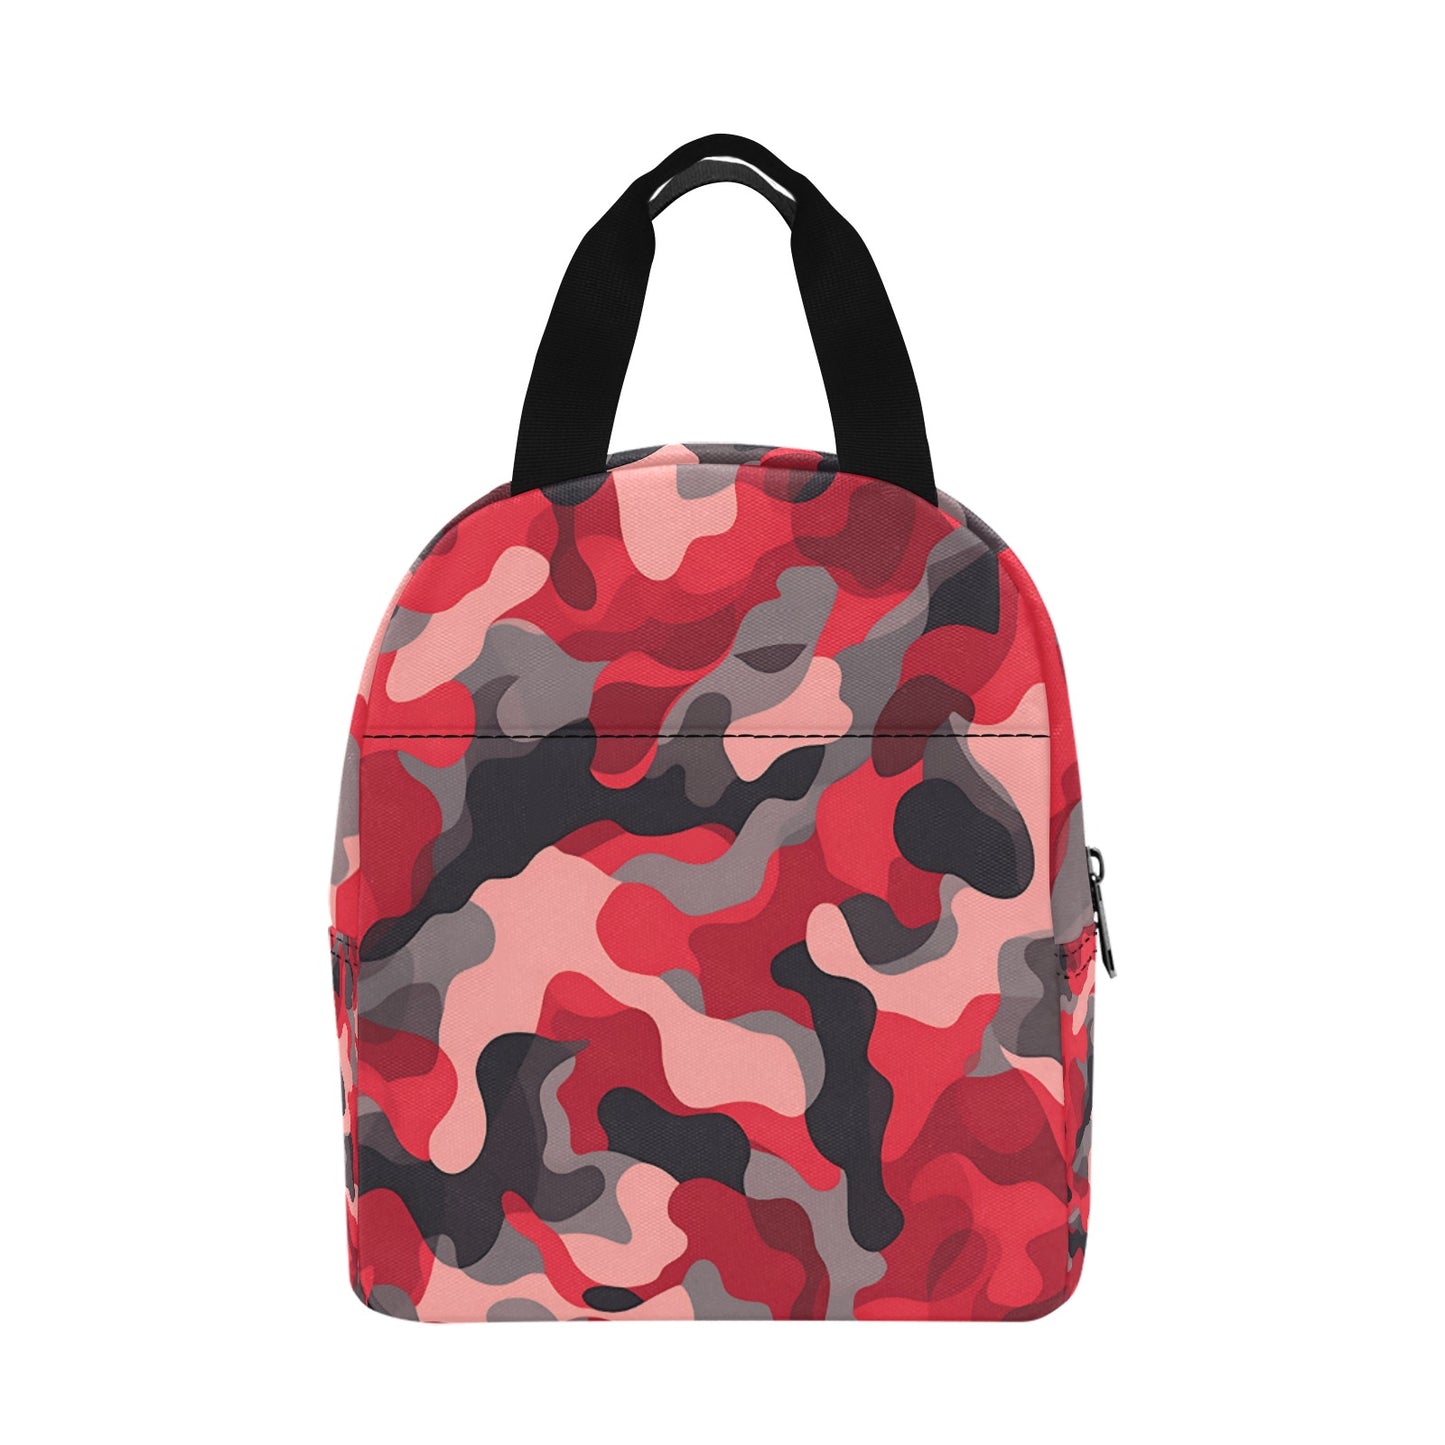 Insulated Zipper Lunch Bag- Red Camouflage